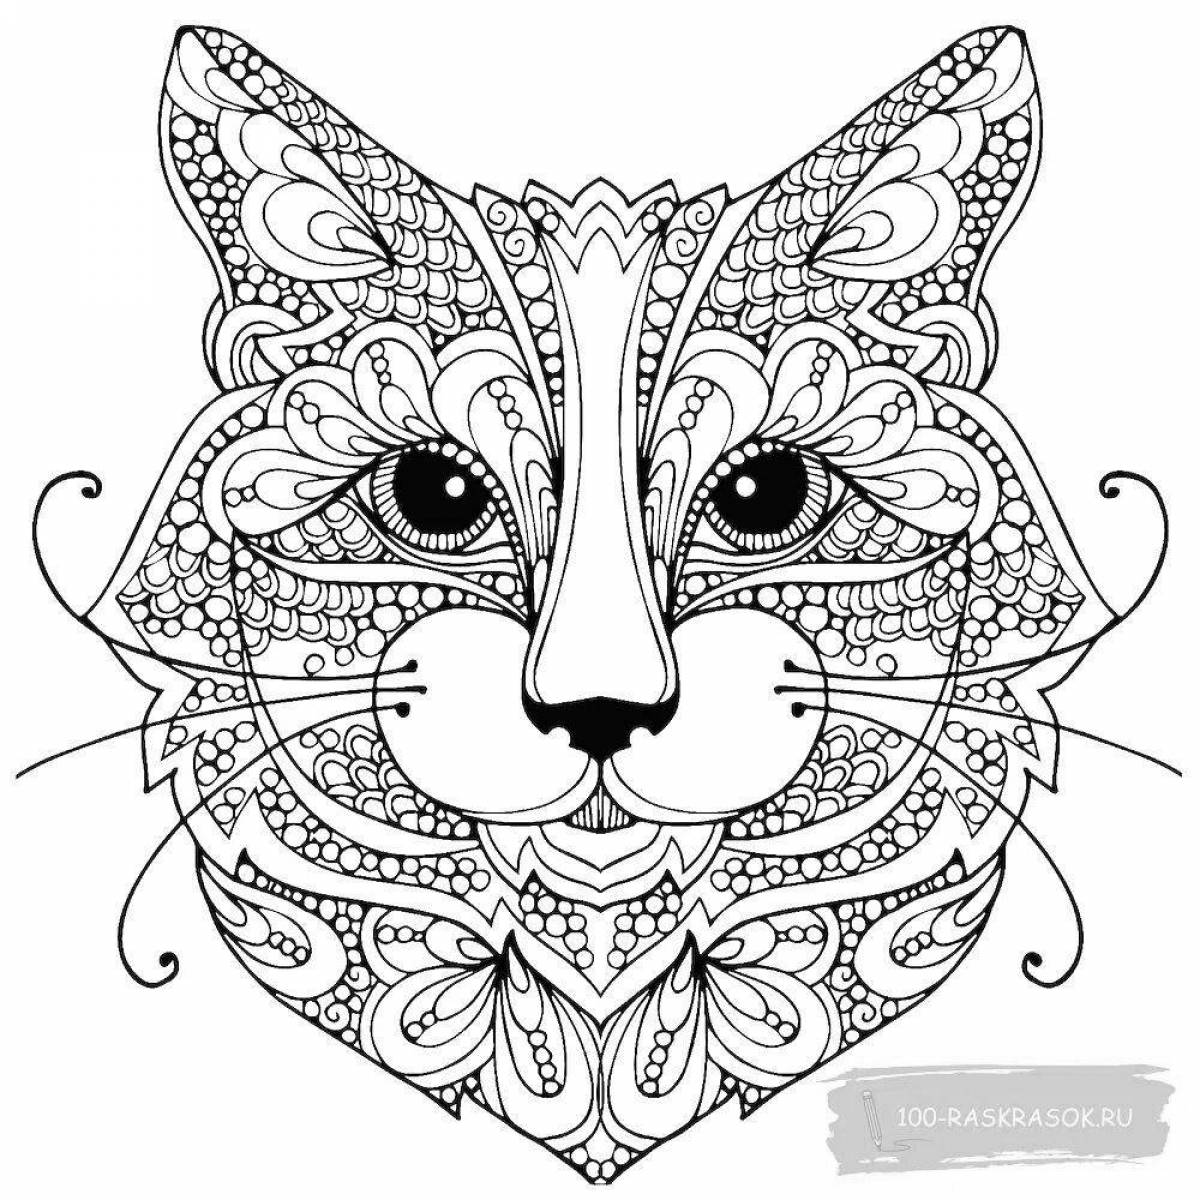 Glorious coloring for girls 12 years old - cats